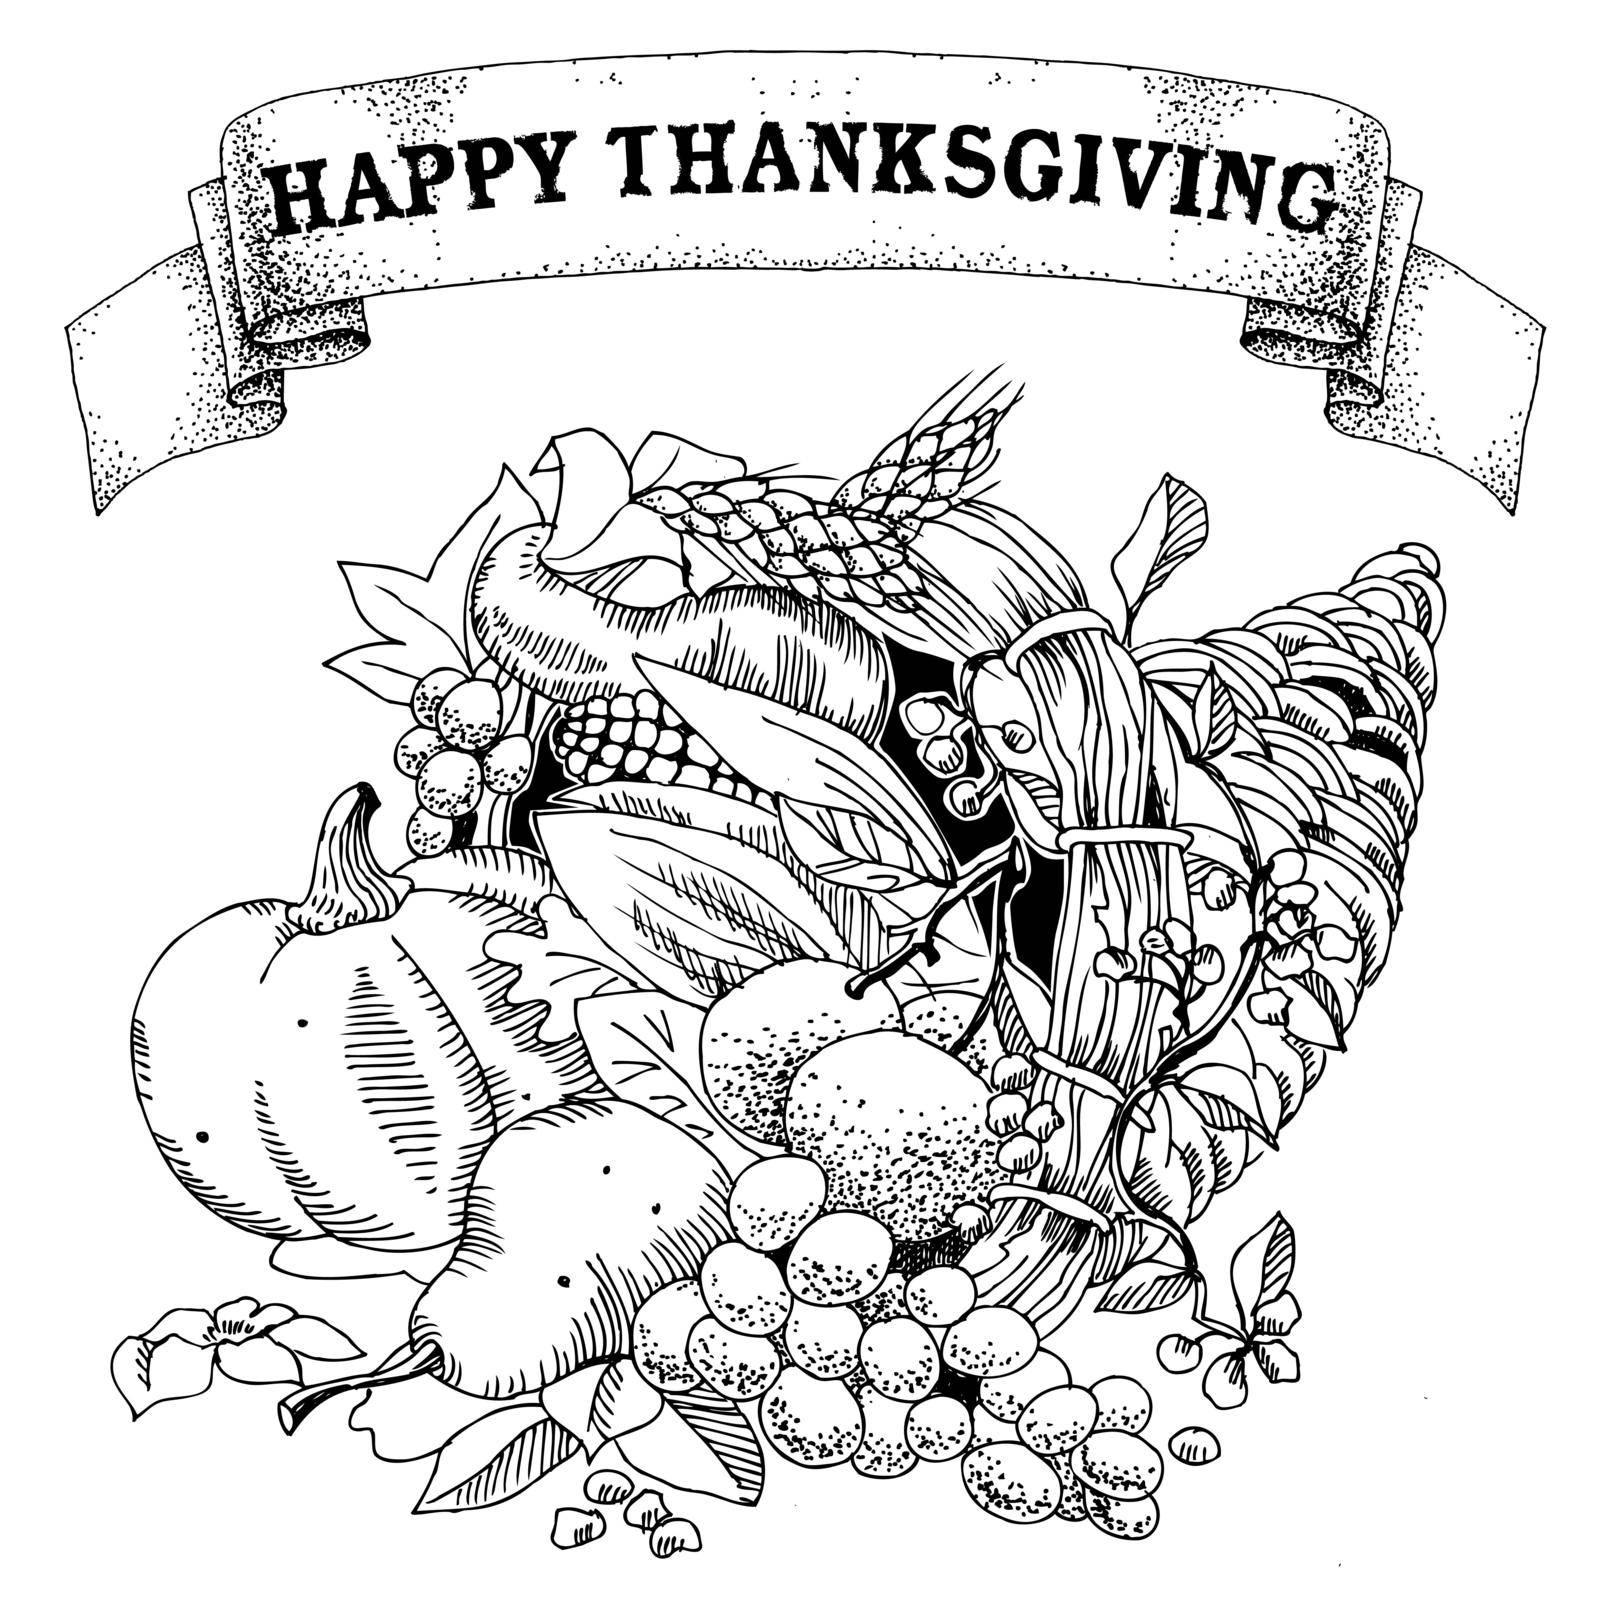 Illustration of a Thanksgiving cornucopia full of harvest fruits and vegetables